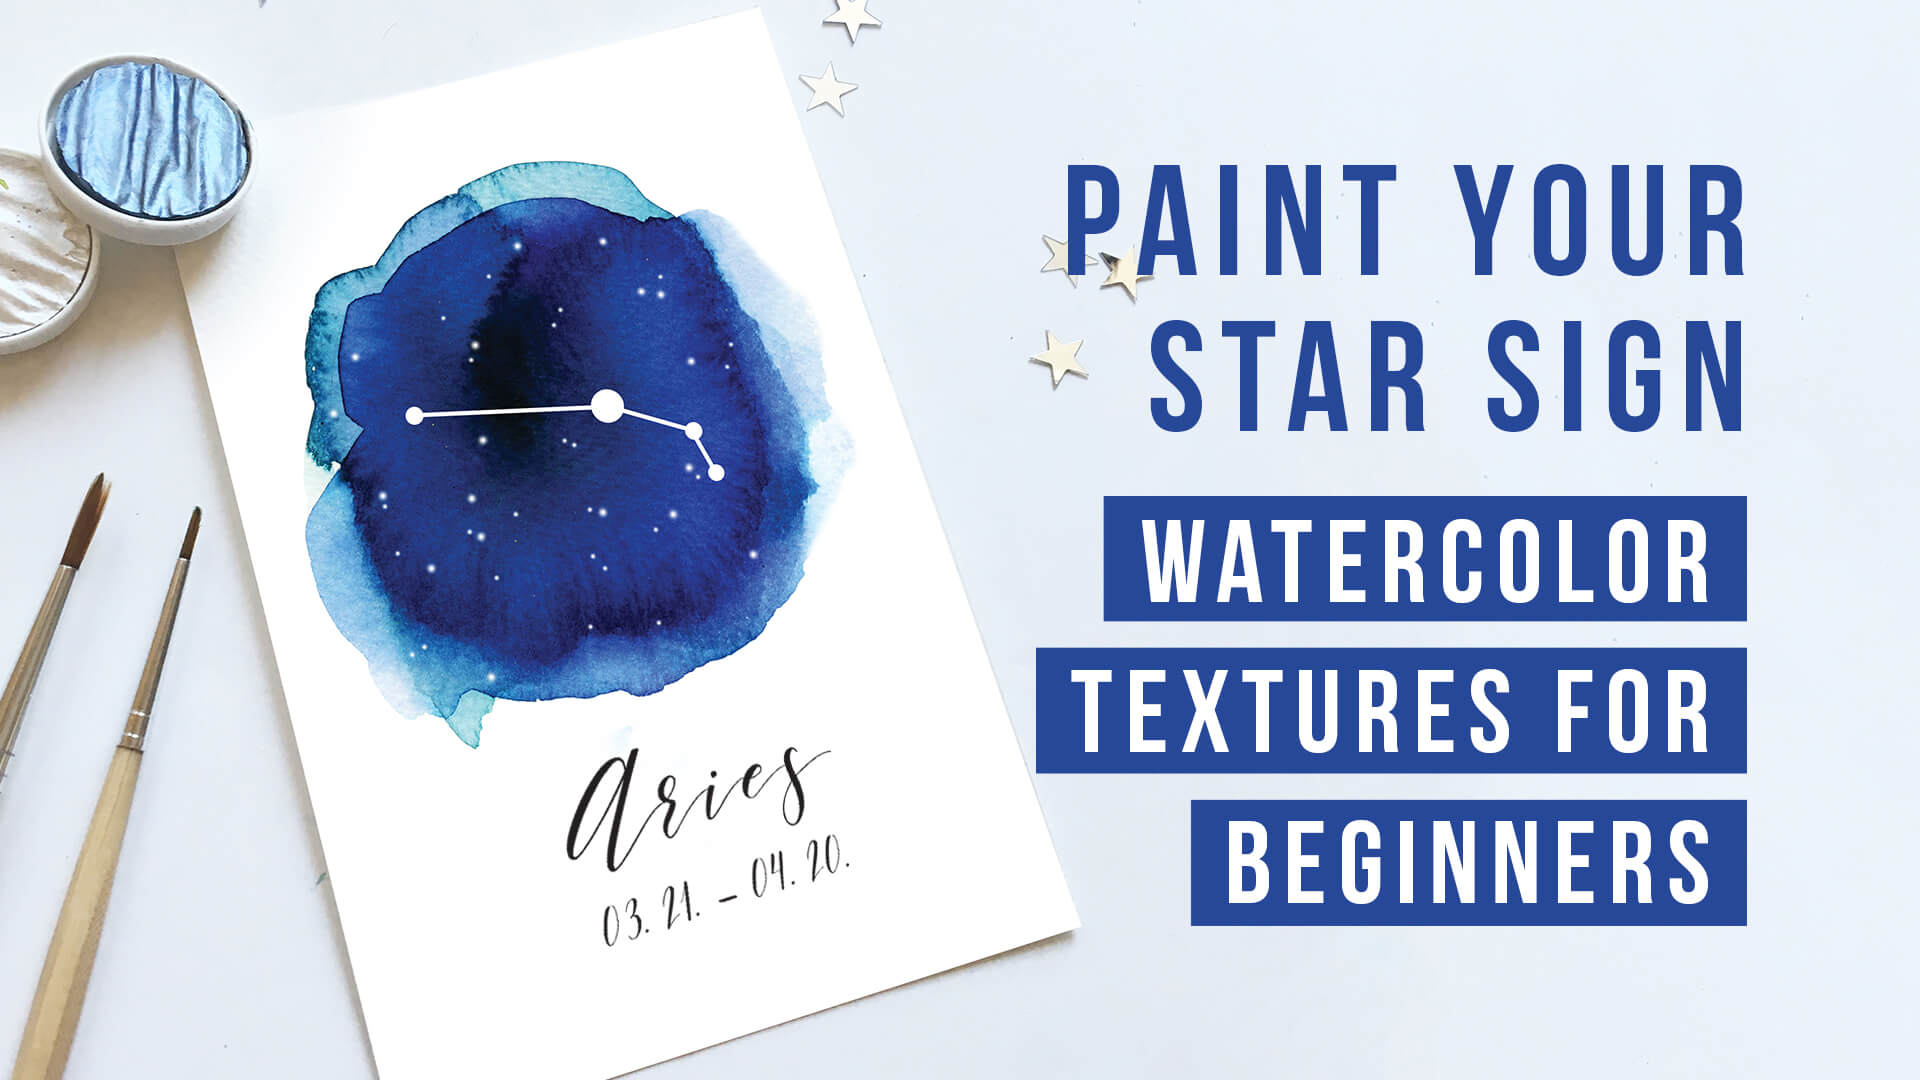 Paint your star sign - watercolor textures for beginners